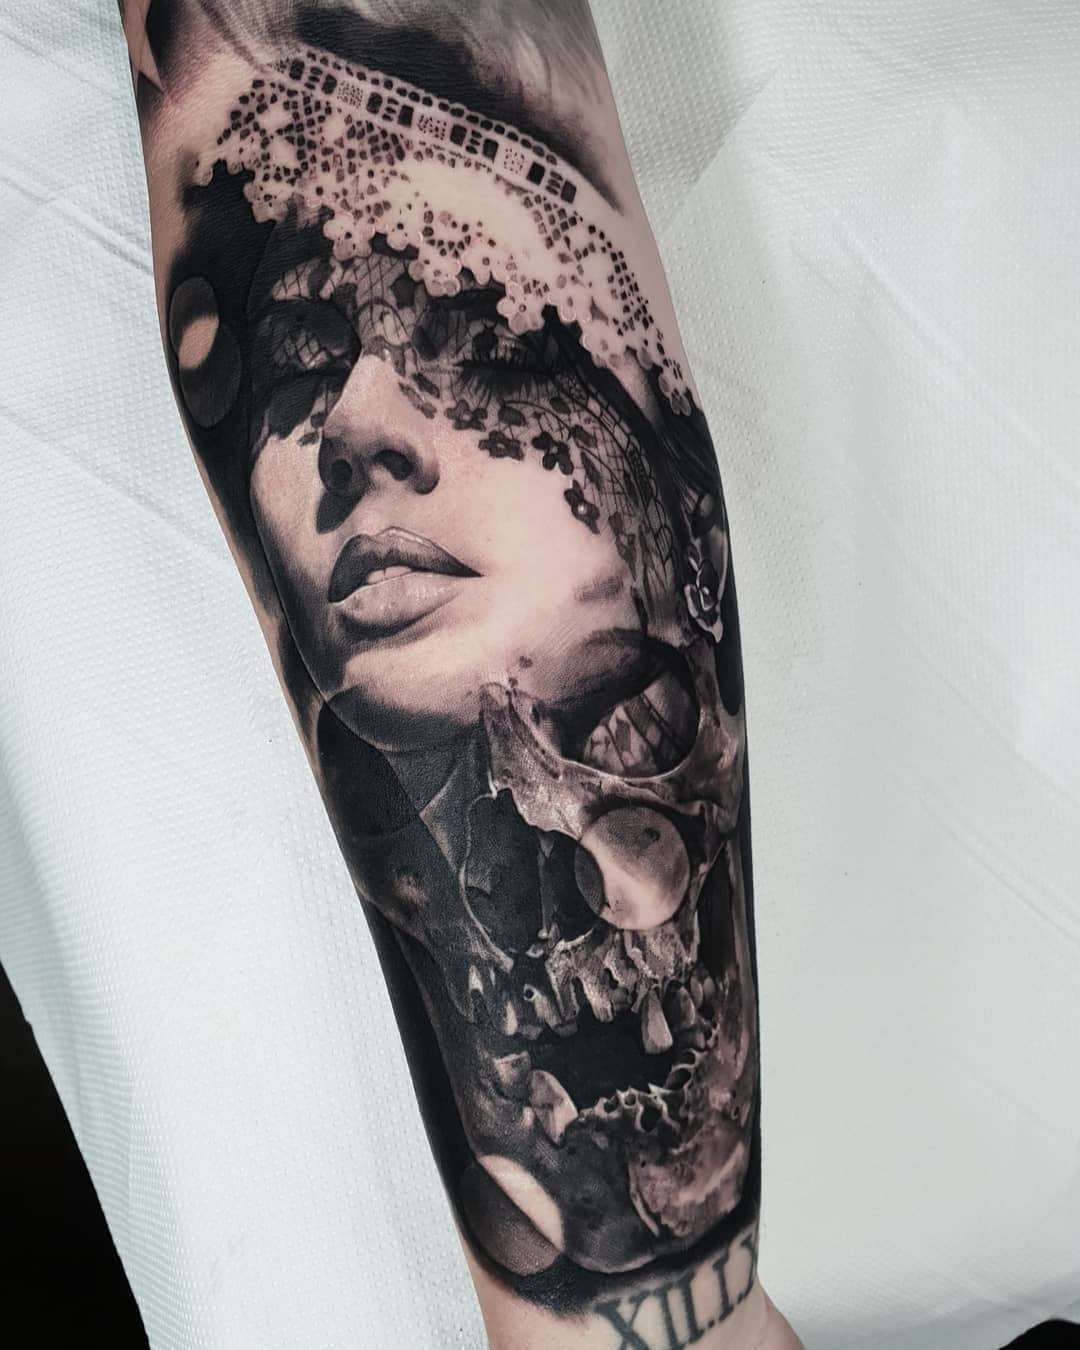 Black and gray detailed tattoo realism by Nick Imms